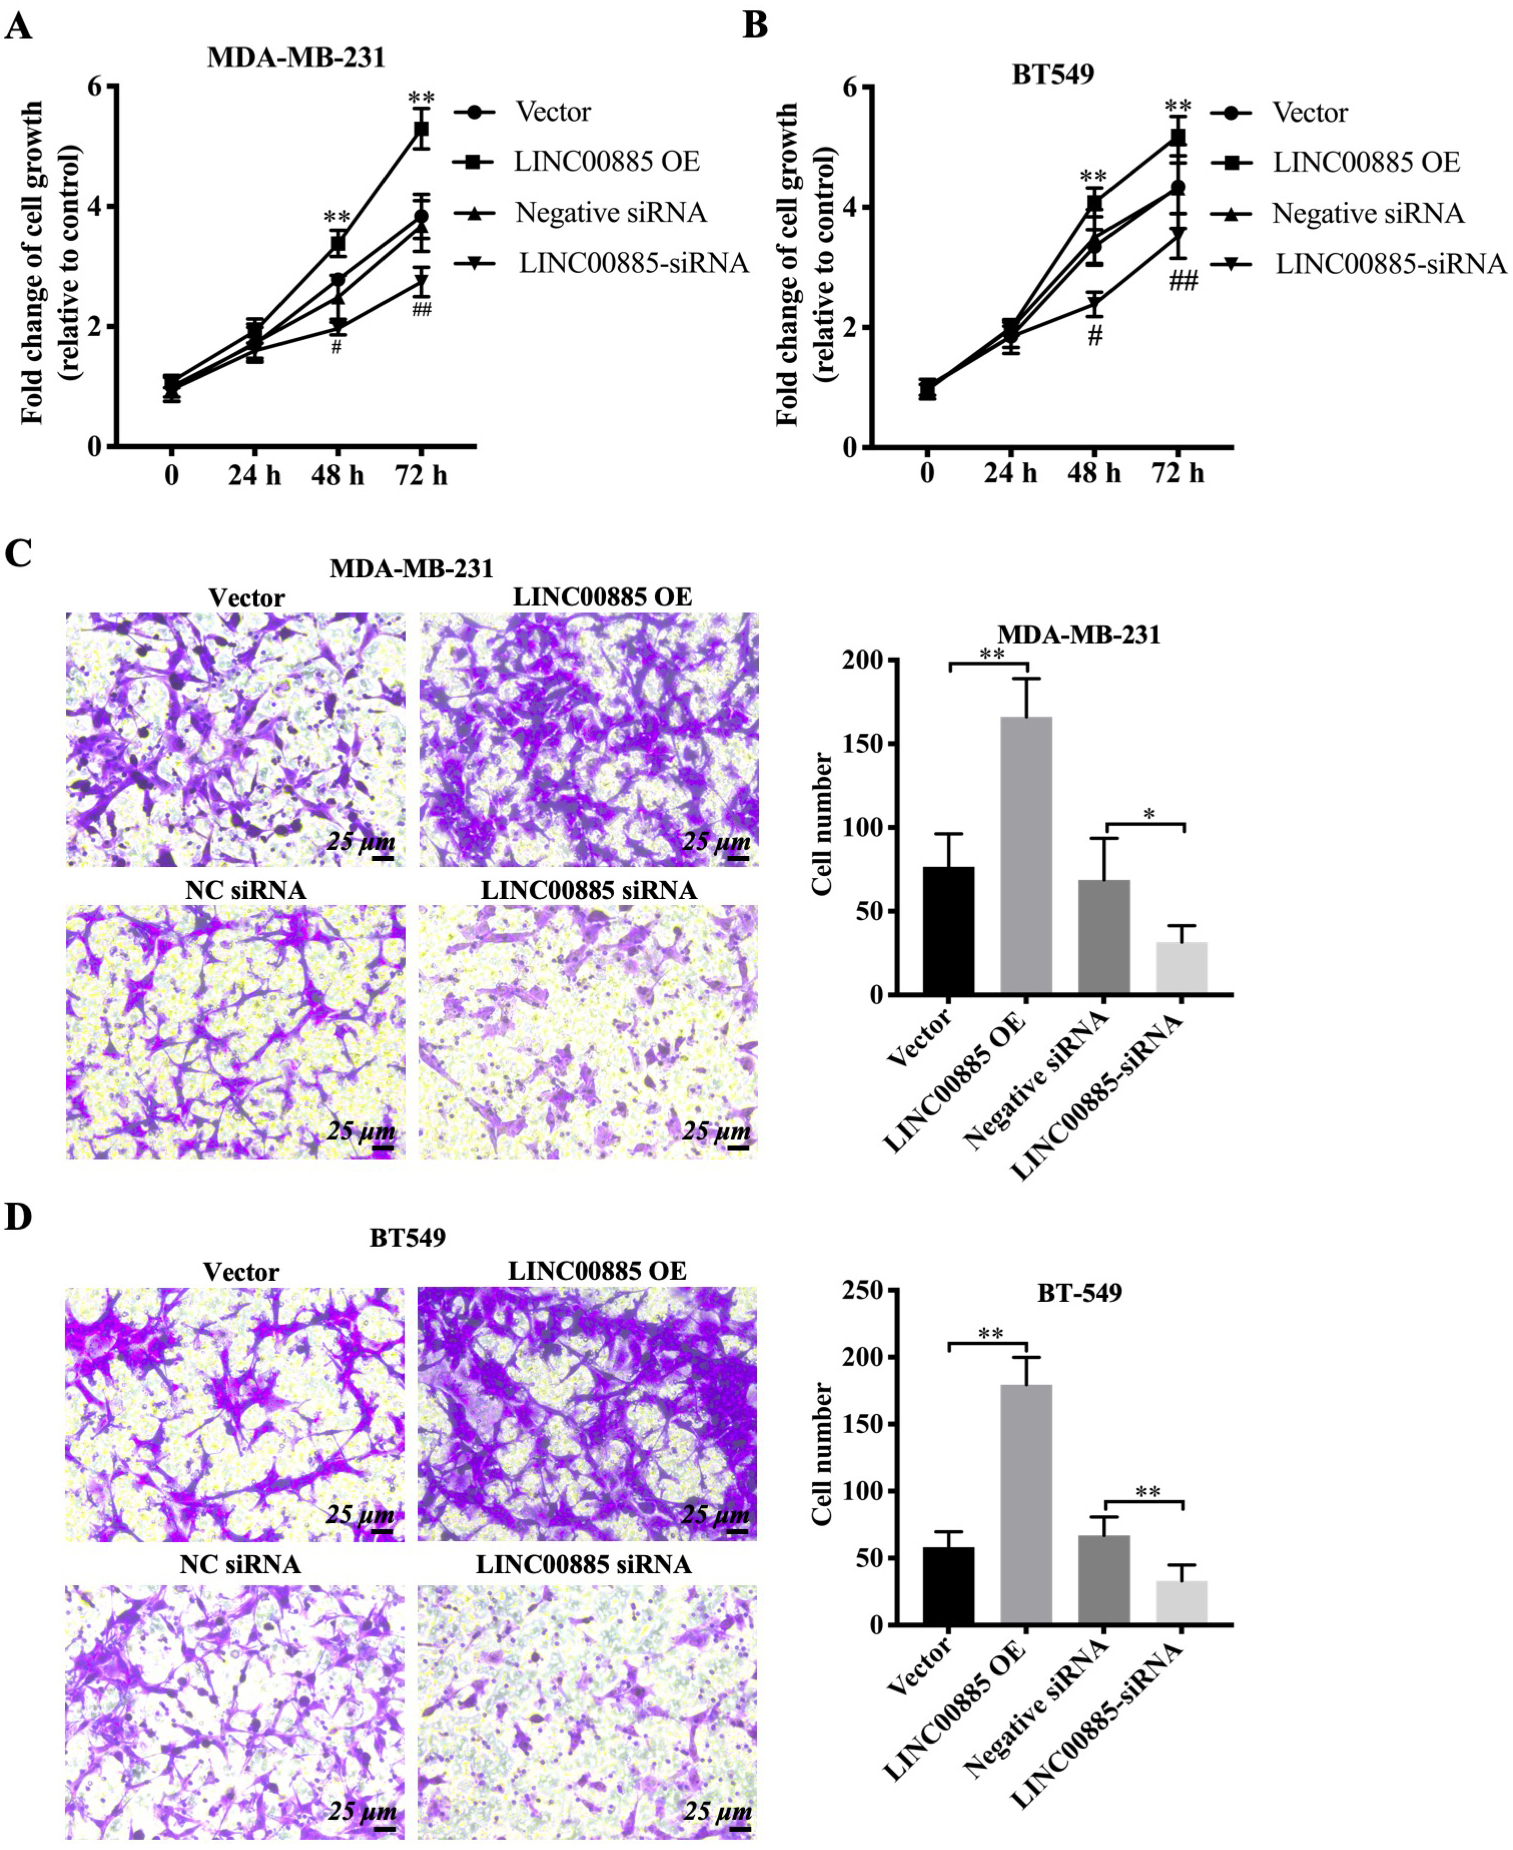 Effect of LINC00885 on the migration of triple-negative breast cancer cells. The plasmid overexpressing LINC00885, LINC00885 siRNA and the corresponding control vector/NC-siRNA were injected into BT549 and MDA-MB-231 cells. MDA-MB-231 (A) and BT549 cell (B) viabilities are determined using the Cell Counting Kit-8 assay. Transwell assay for pcDNA3.1-LINC00885 and siRNA-LINC00885 (C) MDA-MB-231 and (D) BT549 cells. Relative quantification of migrated cells is shown in the right panel (scale bar, 25 μm). **P< 0.01, pcDNA3.1-LINC00885 or siRNA-LINC00885 vs. pcDNA3.1 or NC-siRNA. NC, negative control; pcDNA3.1, plasmid NC; si-RNA, small interfering RNA; pcDNA3.1-LINC00885, LINC00885-overexpression plasmid; siRNA-LINC00885, siRNA targeting LINC00885.